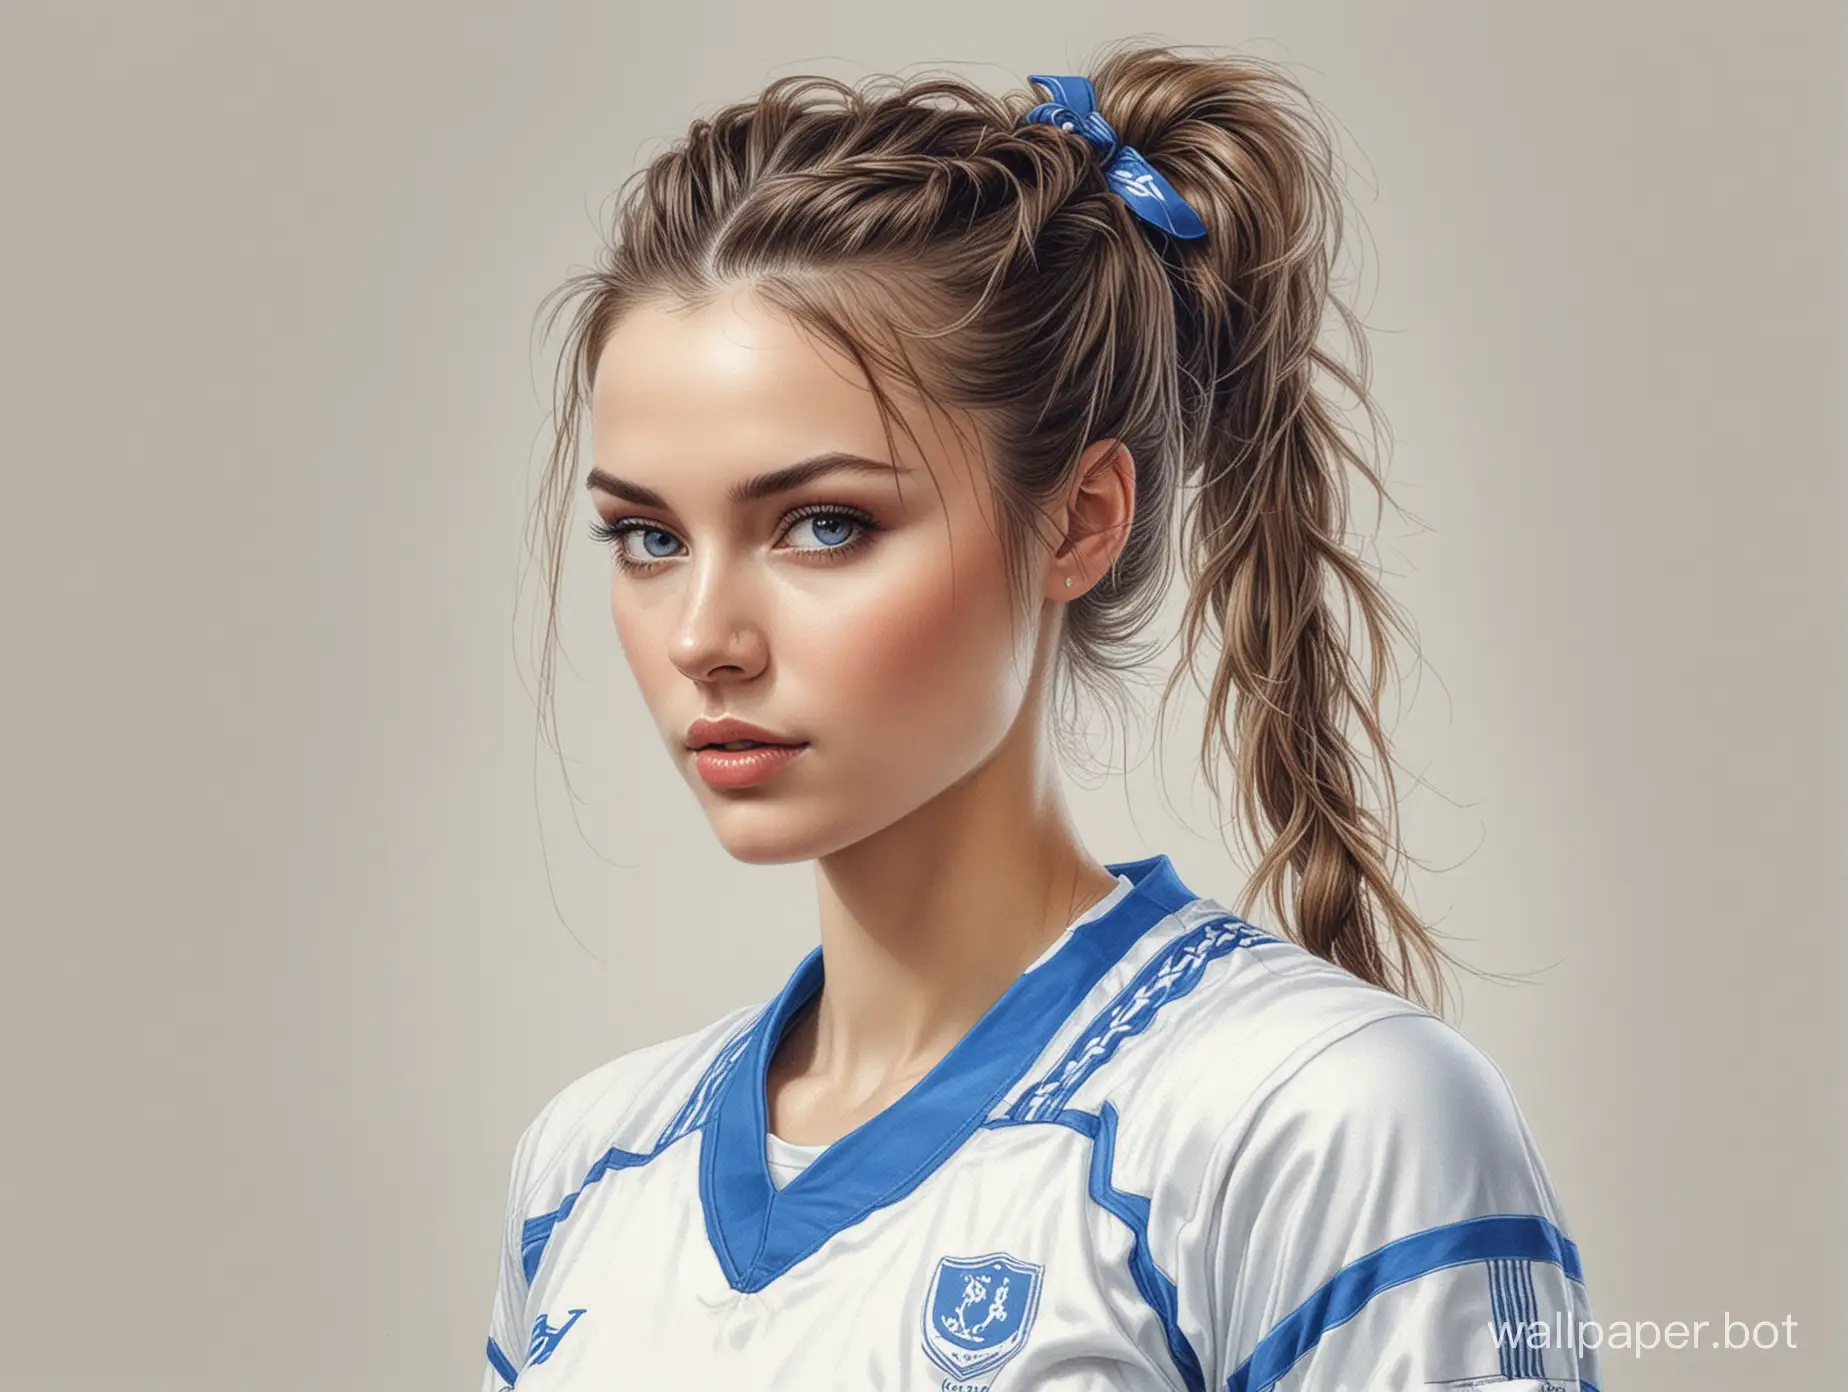 Sketch Anna Komarova hairstyle WEAVING, 25 years old cup size 4, narrow waist, in bright blue soccer uniform on white background, very realistic colored pencil drawing Stml Luis Royo